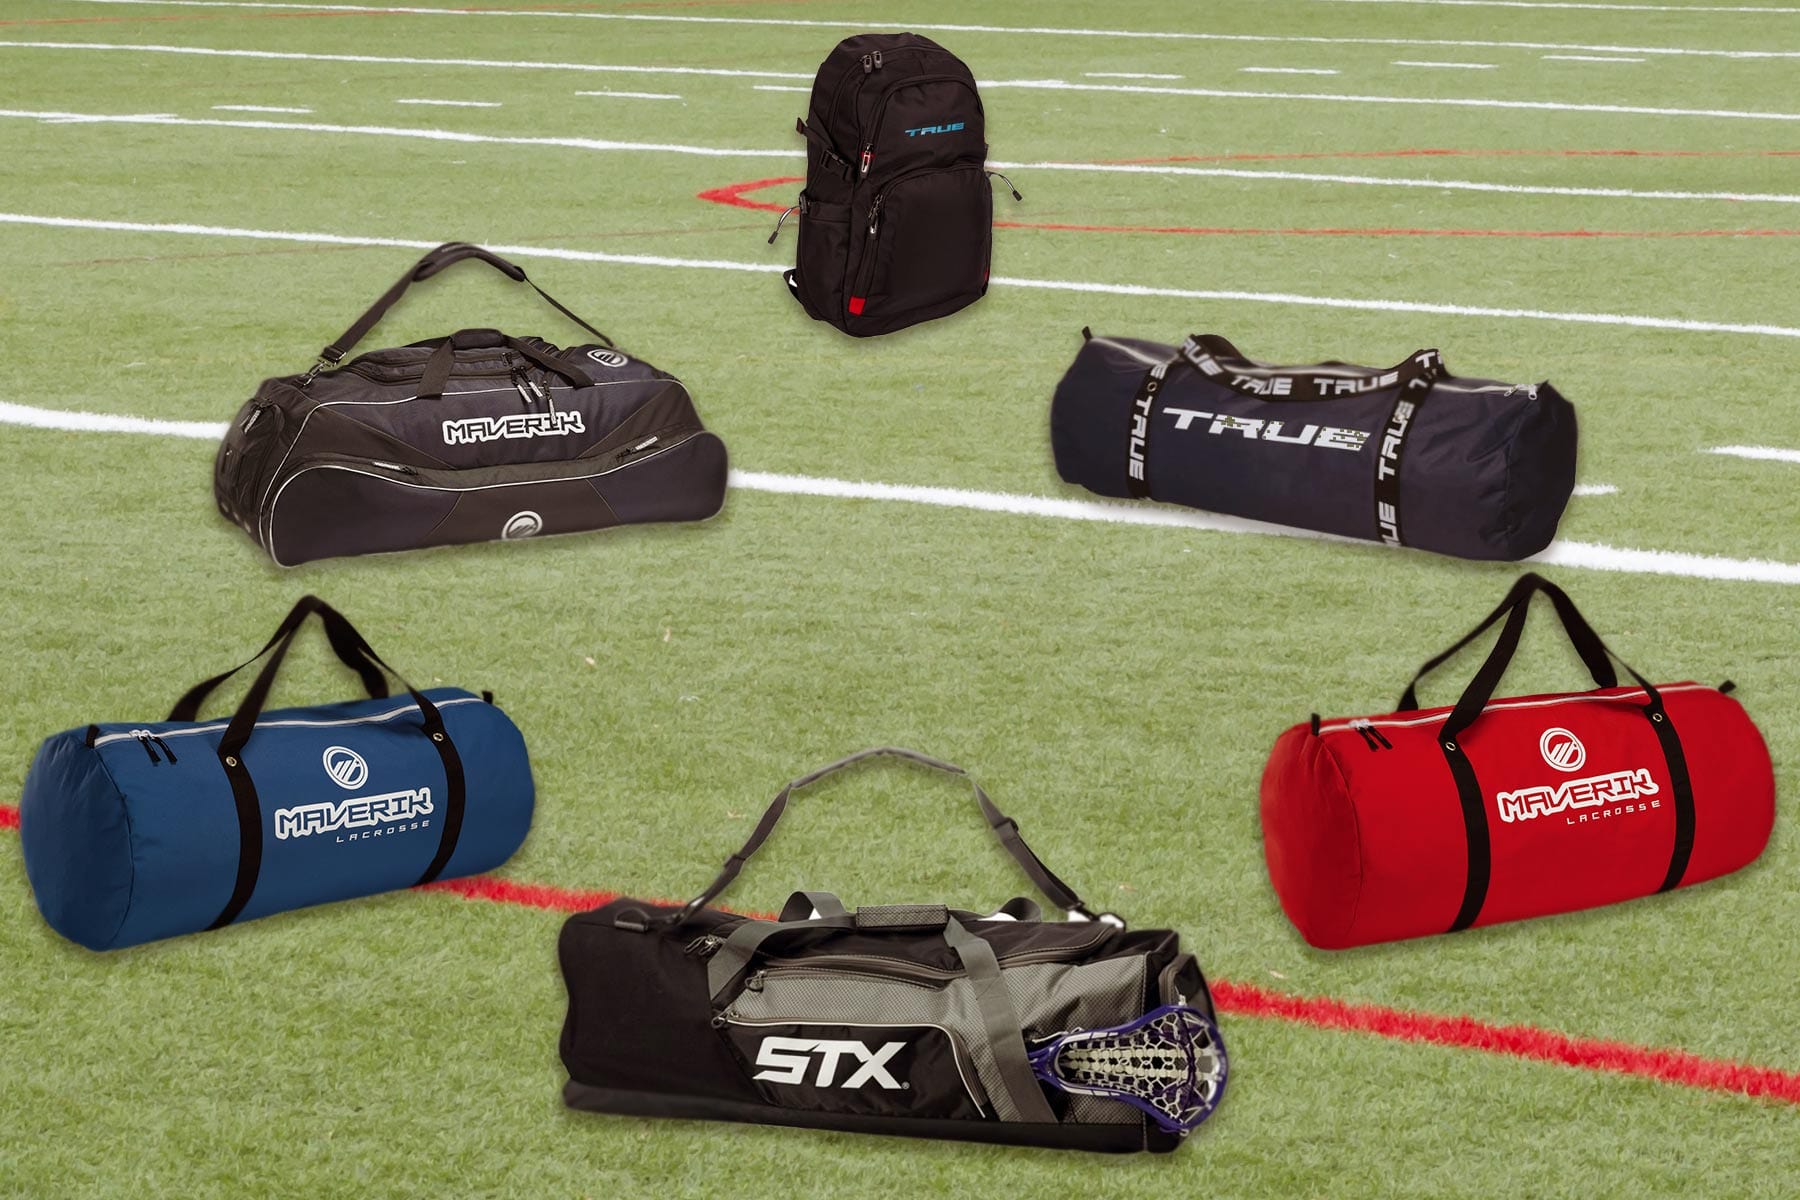 Equipment bags for the whole team from Lacrosse Fanatic